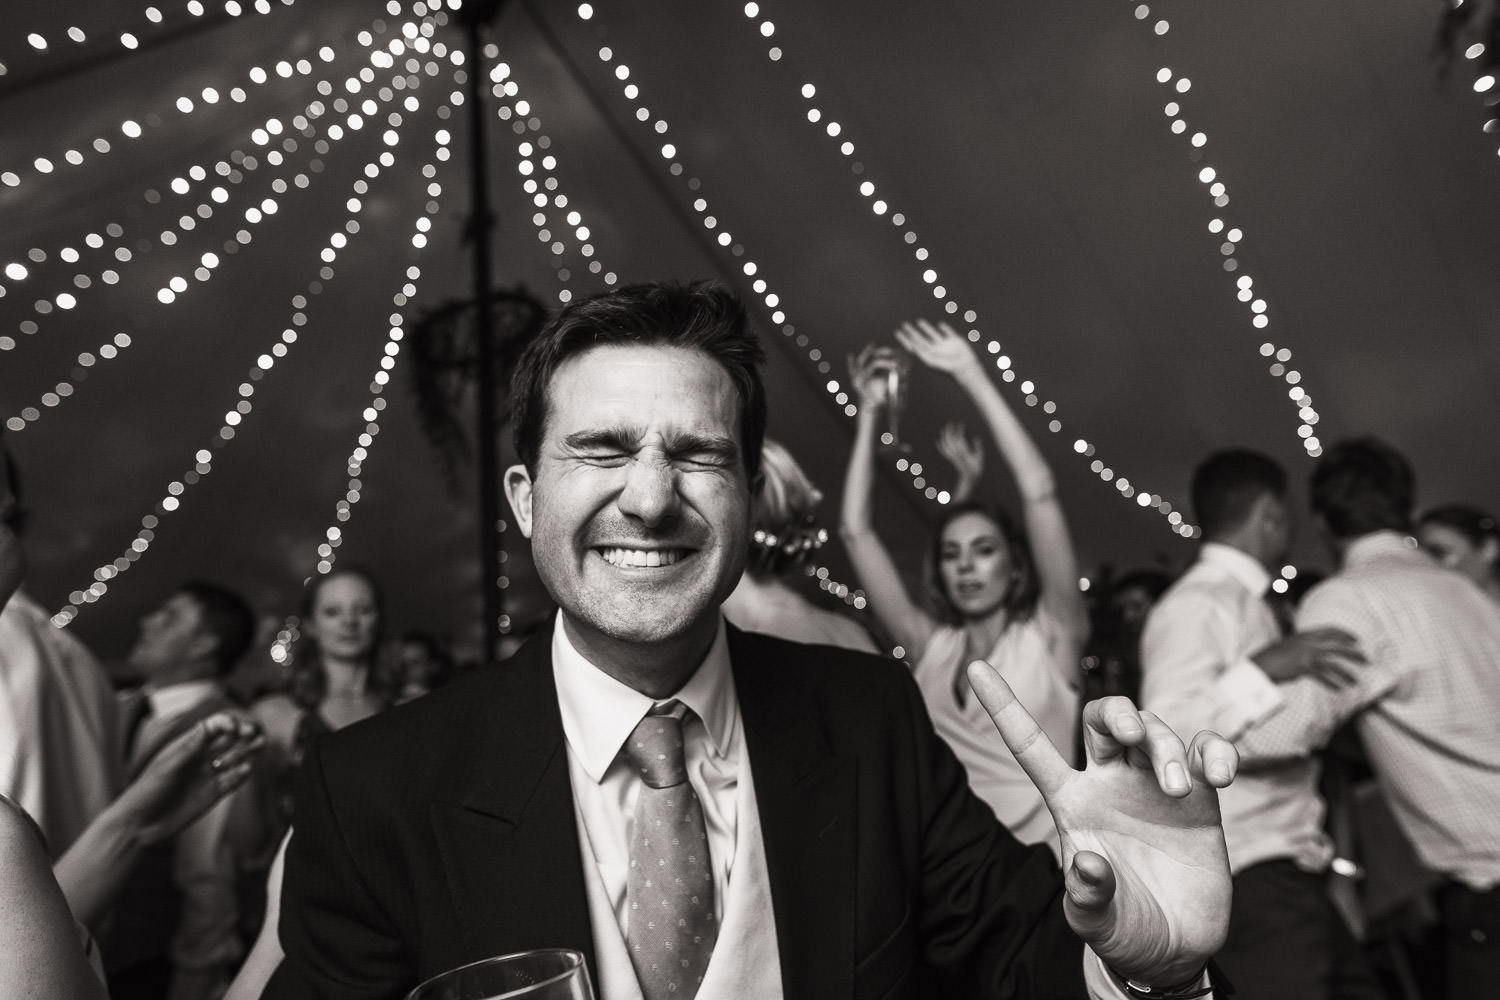 Man closing his eyes and point as people dance behind him at a wedding in Essex.